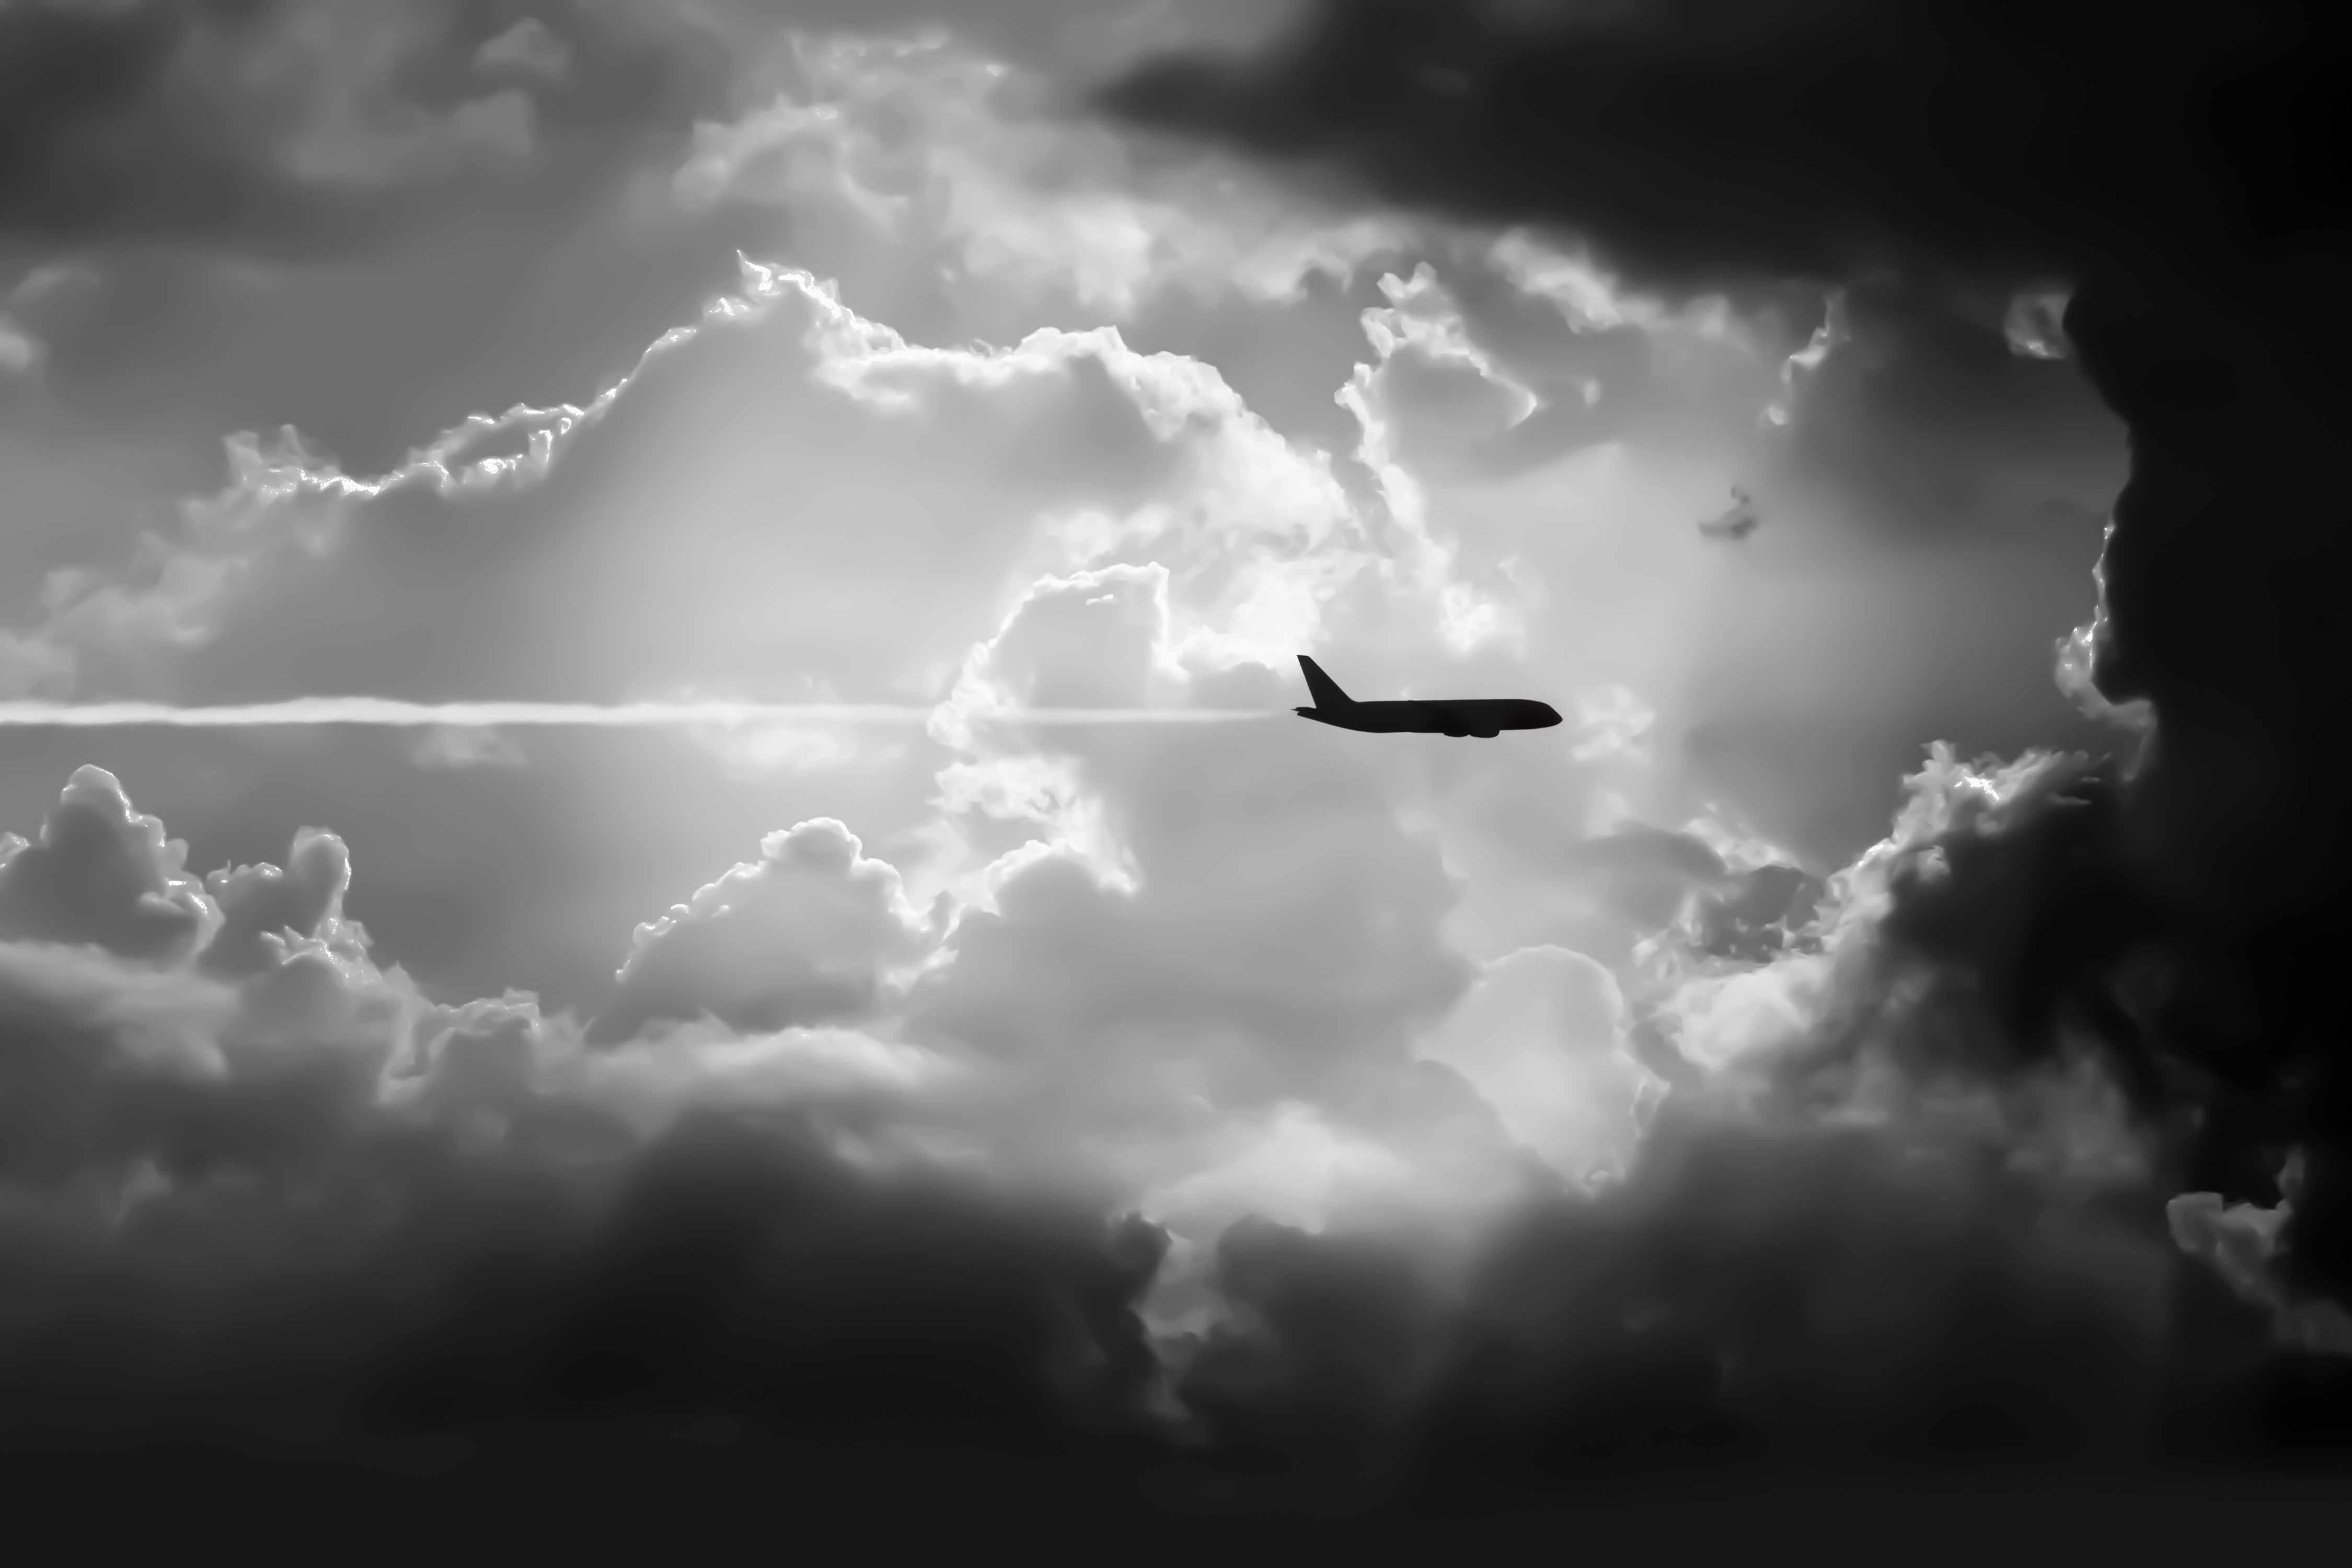 aircraft flying against dark storm clouds